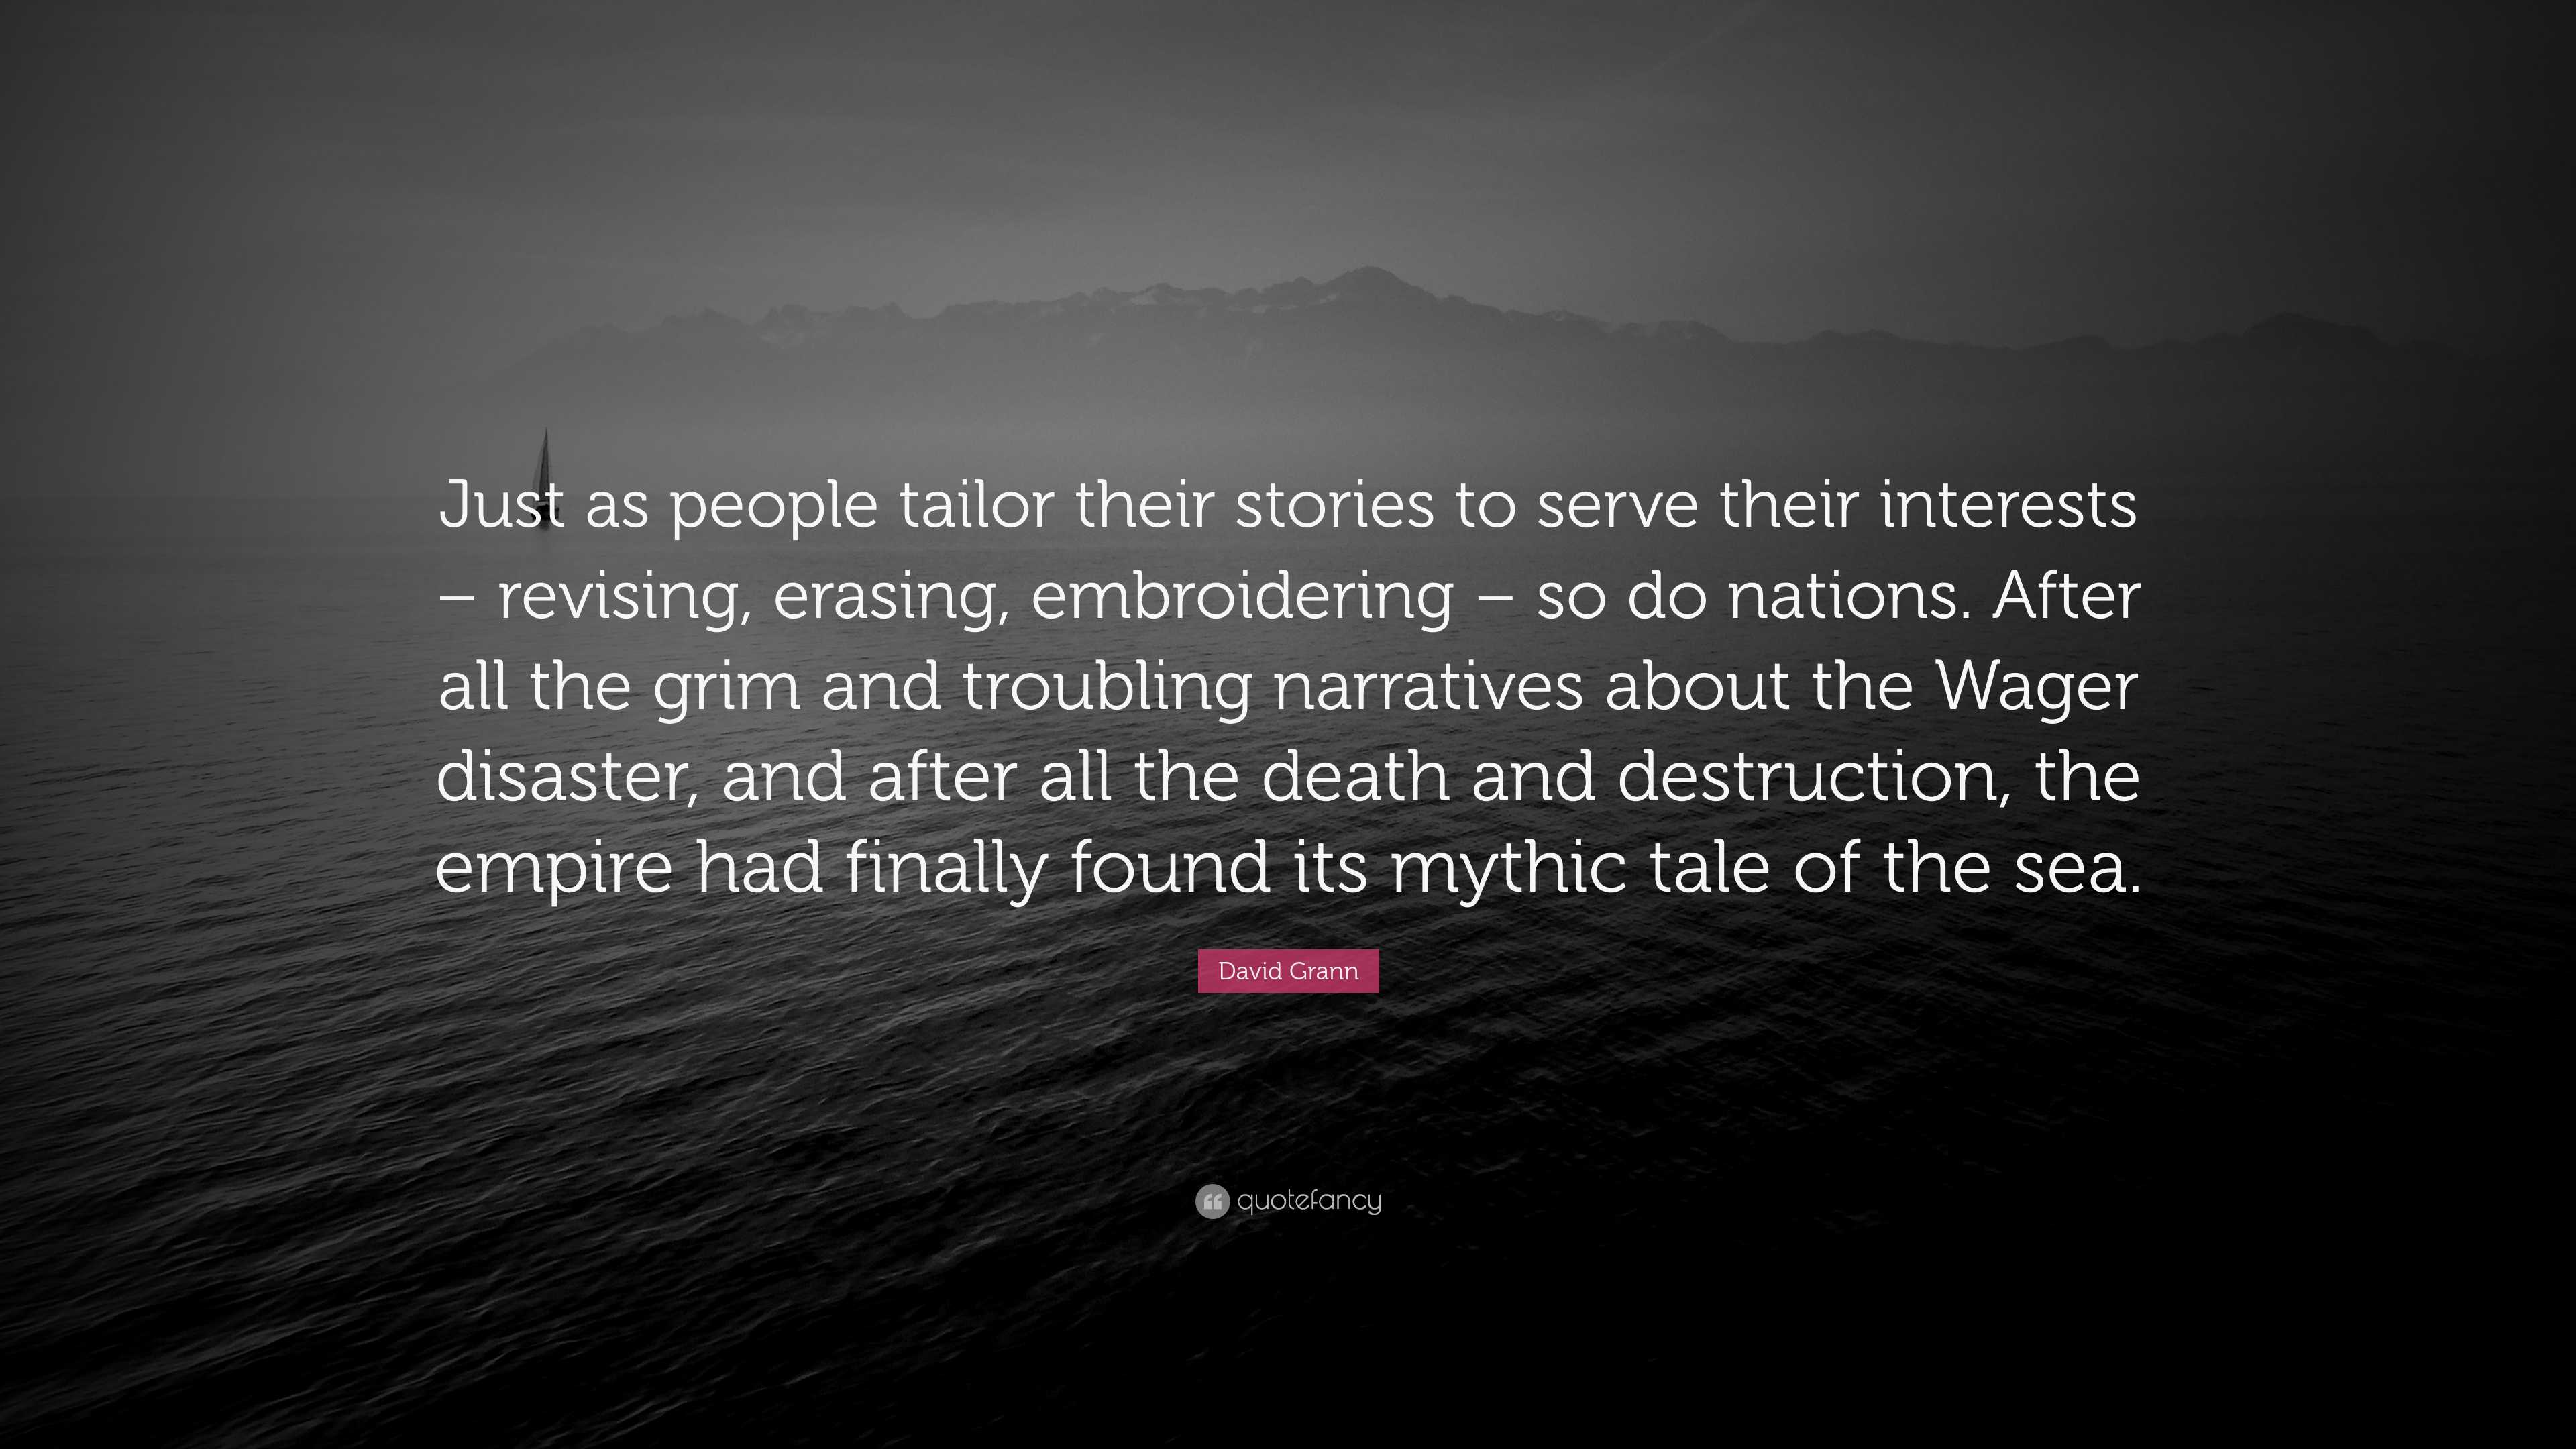 David Grann Quote: “Just as people tailor their stories to serve their ...